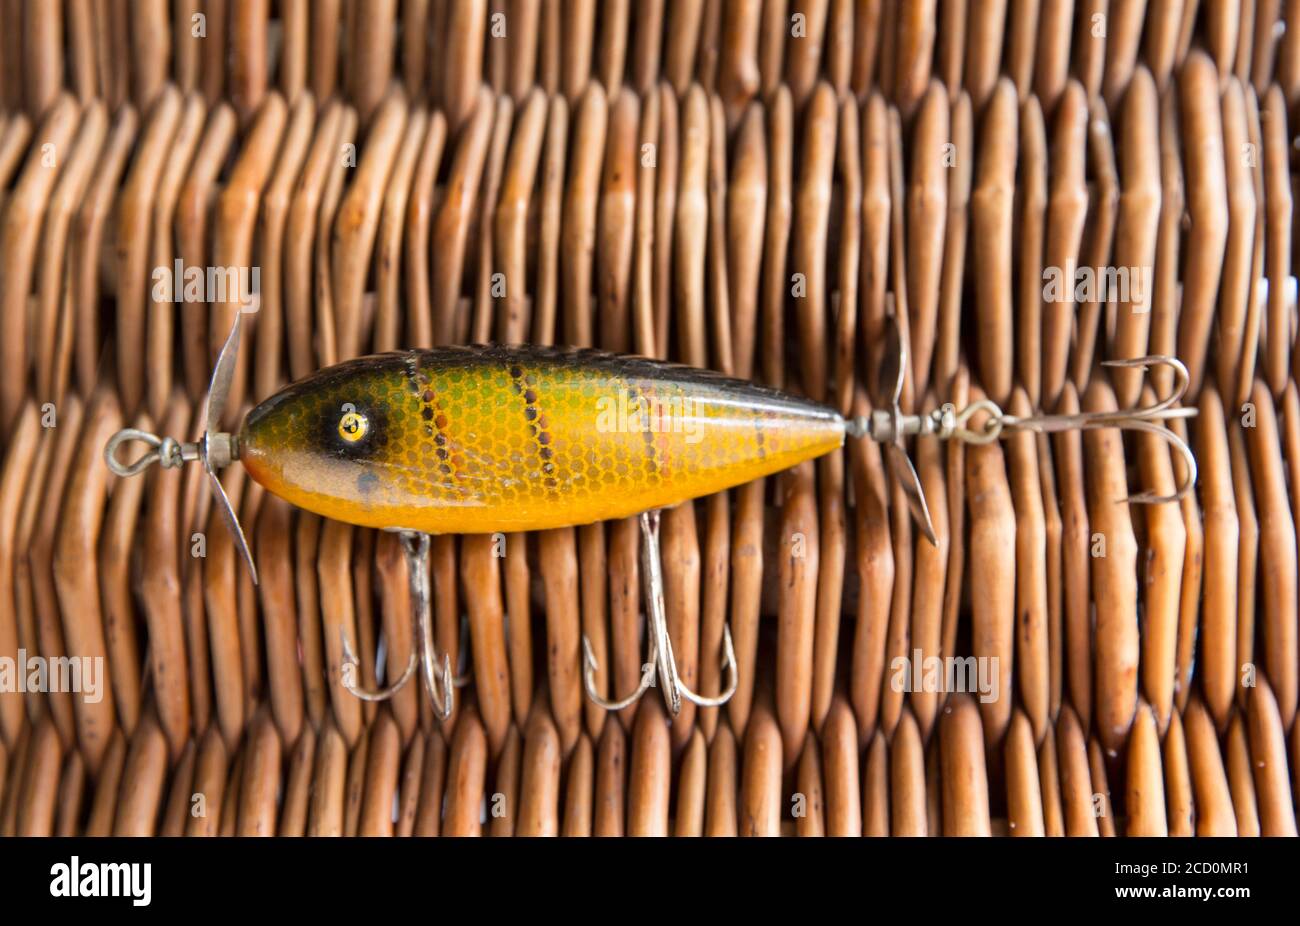 An old South Bend fishing lure, or plug, designed for catching predatory fish photographed against the whicker lid of an old tackle box. From a collec Stock Photo